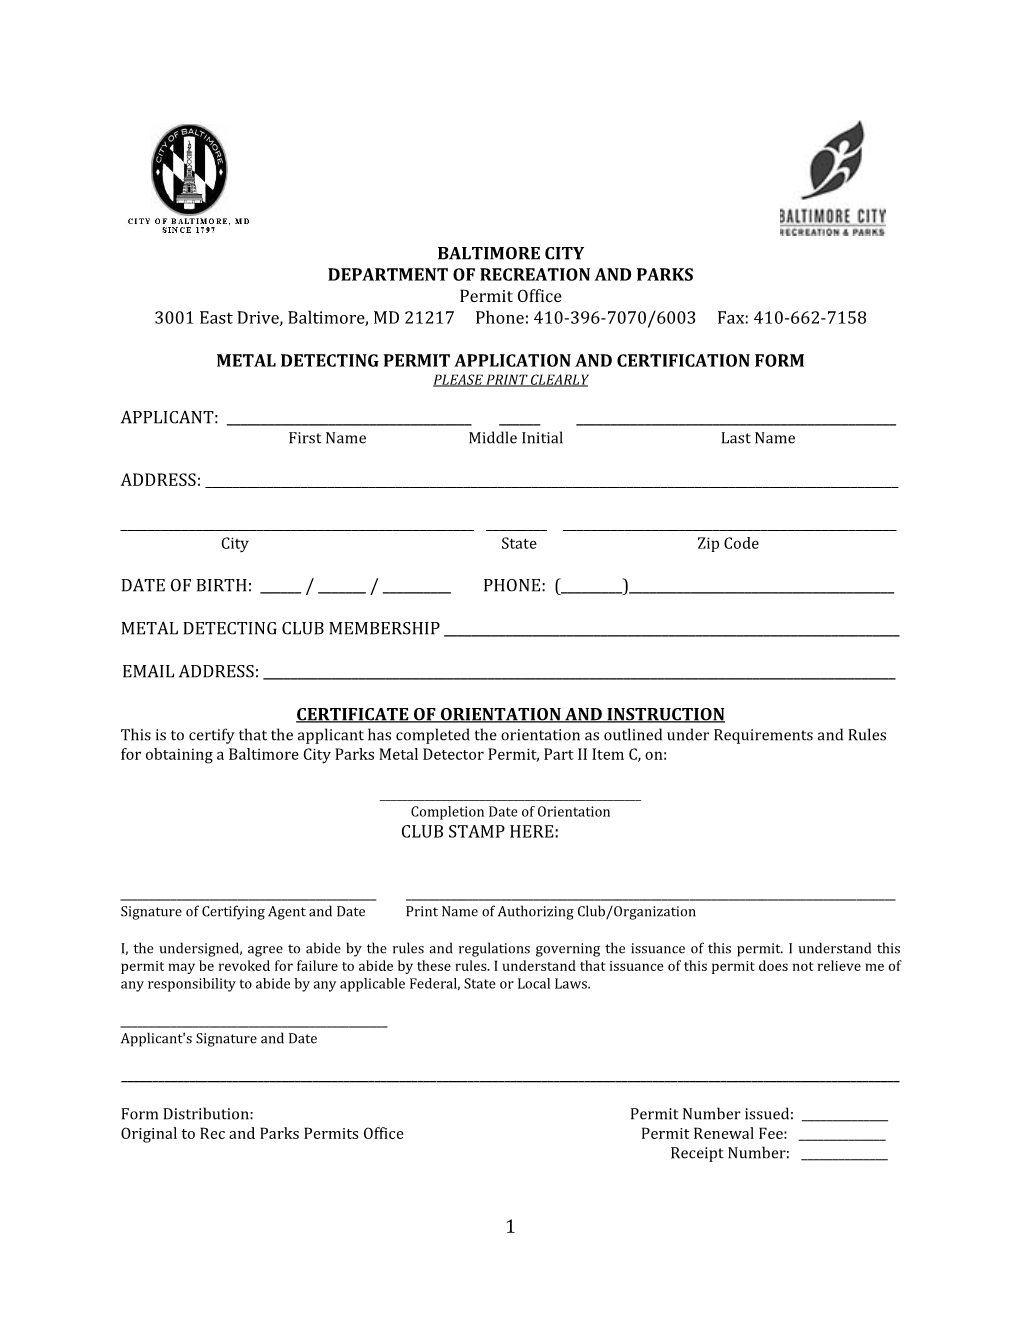 Download the Baltimore City Metal Detecting Permit Application 2016